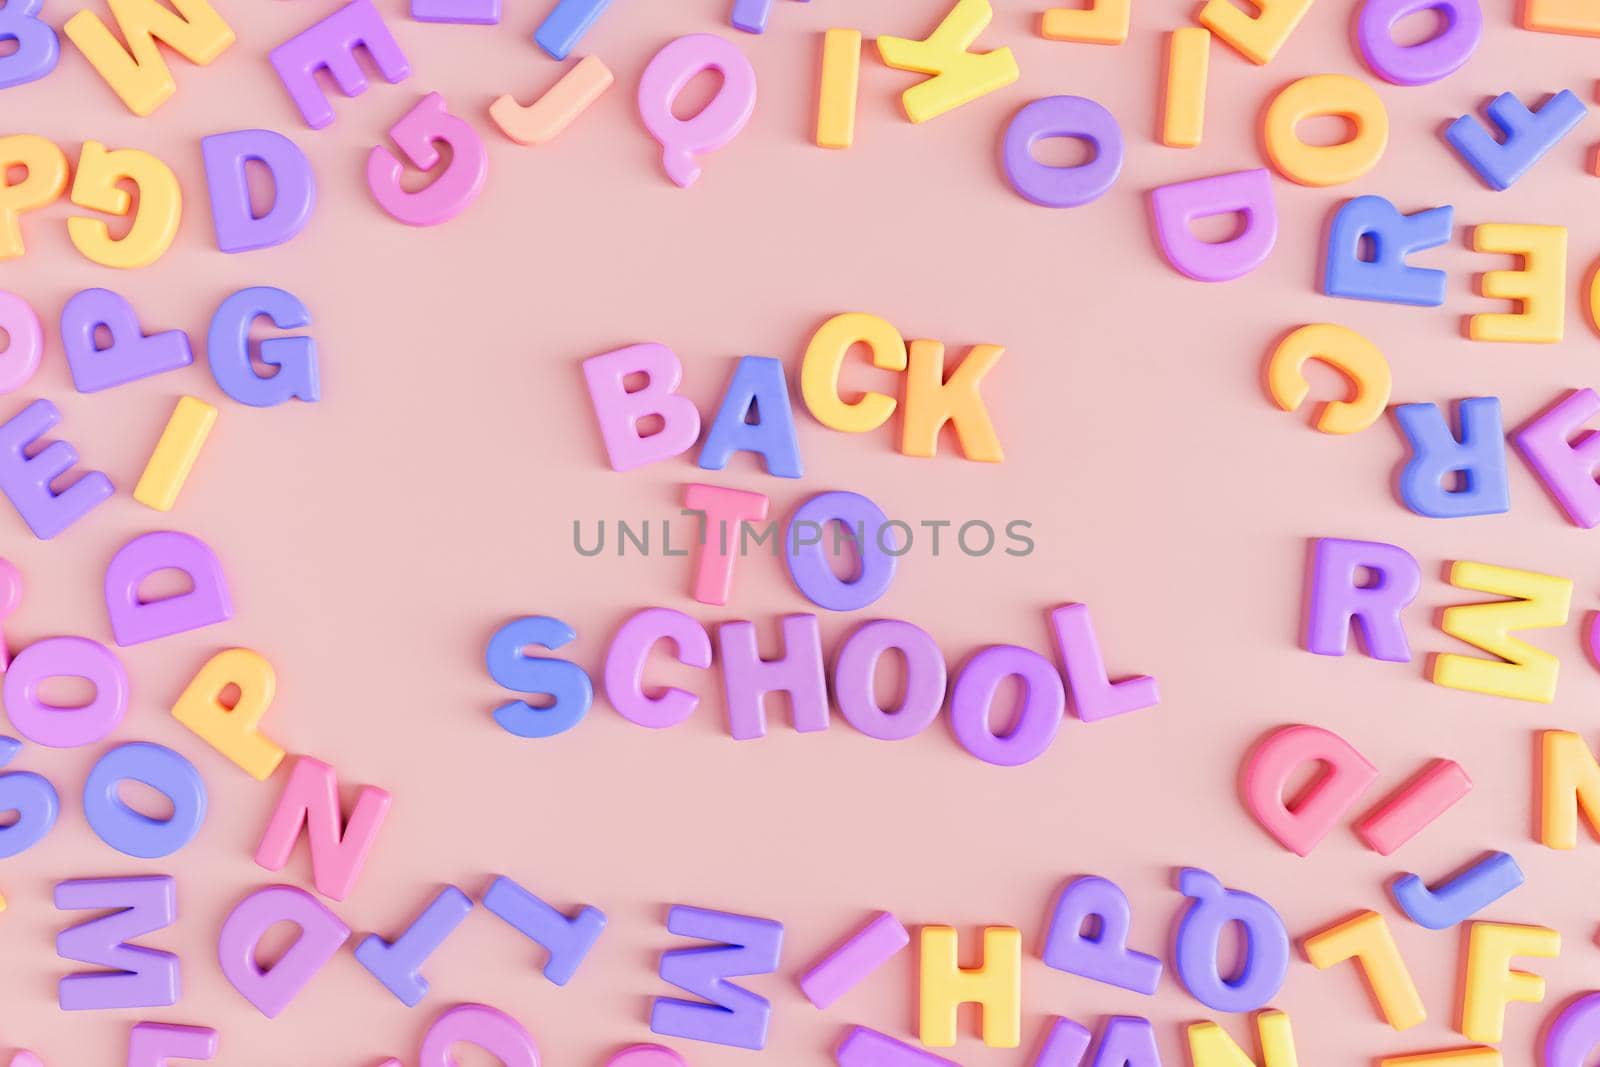 3D letters scattered around Back To School inscription by asolano